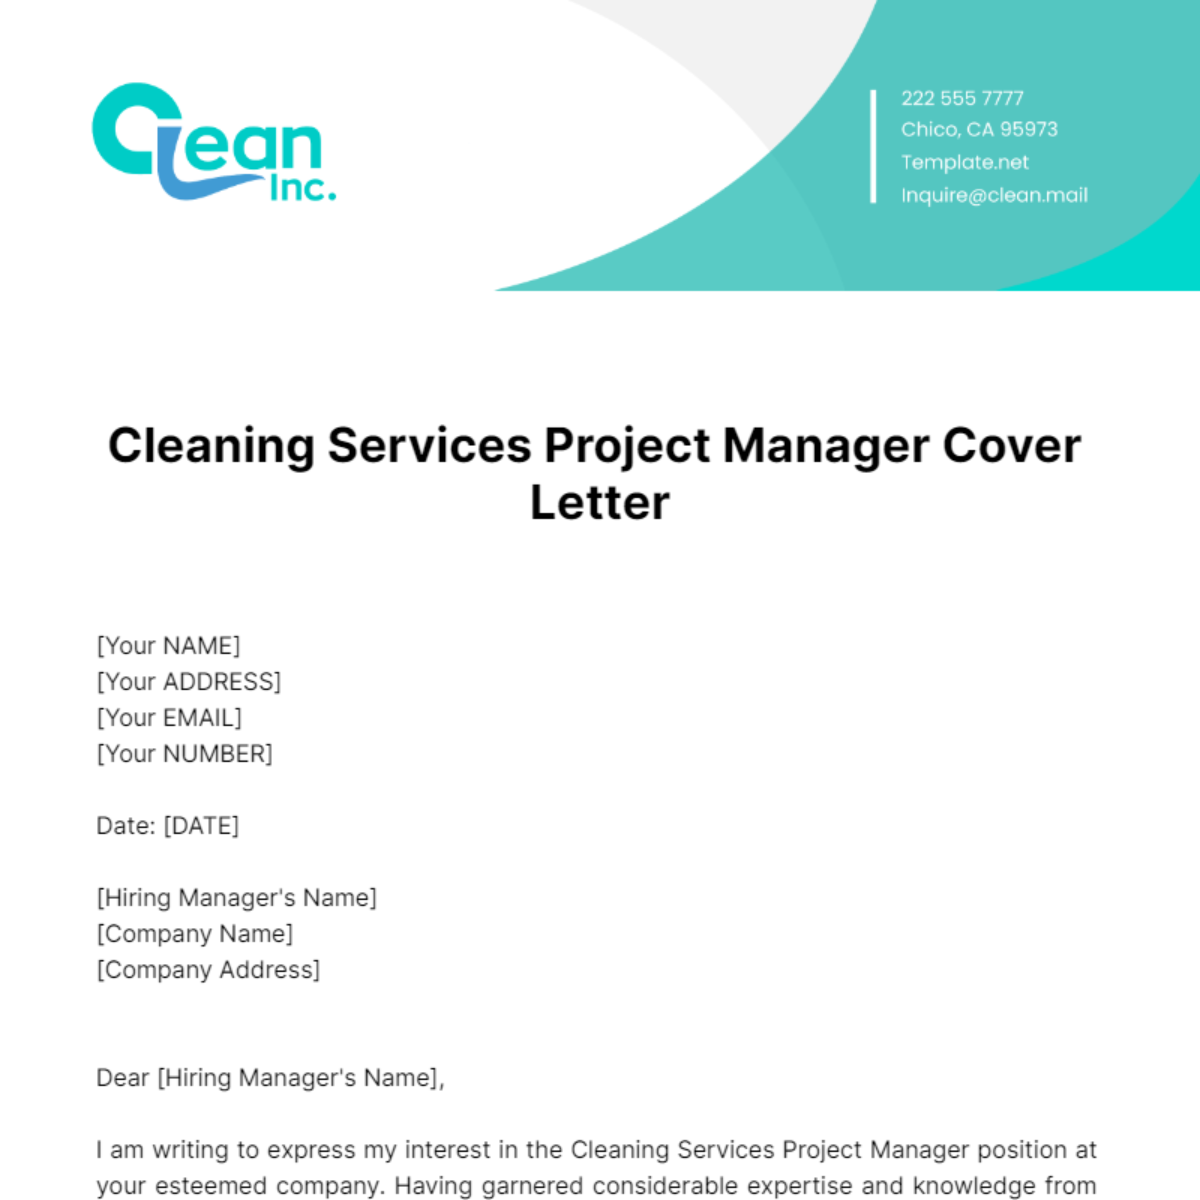 Cleaning Services Project Manager Cover Letter Template